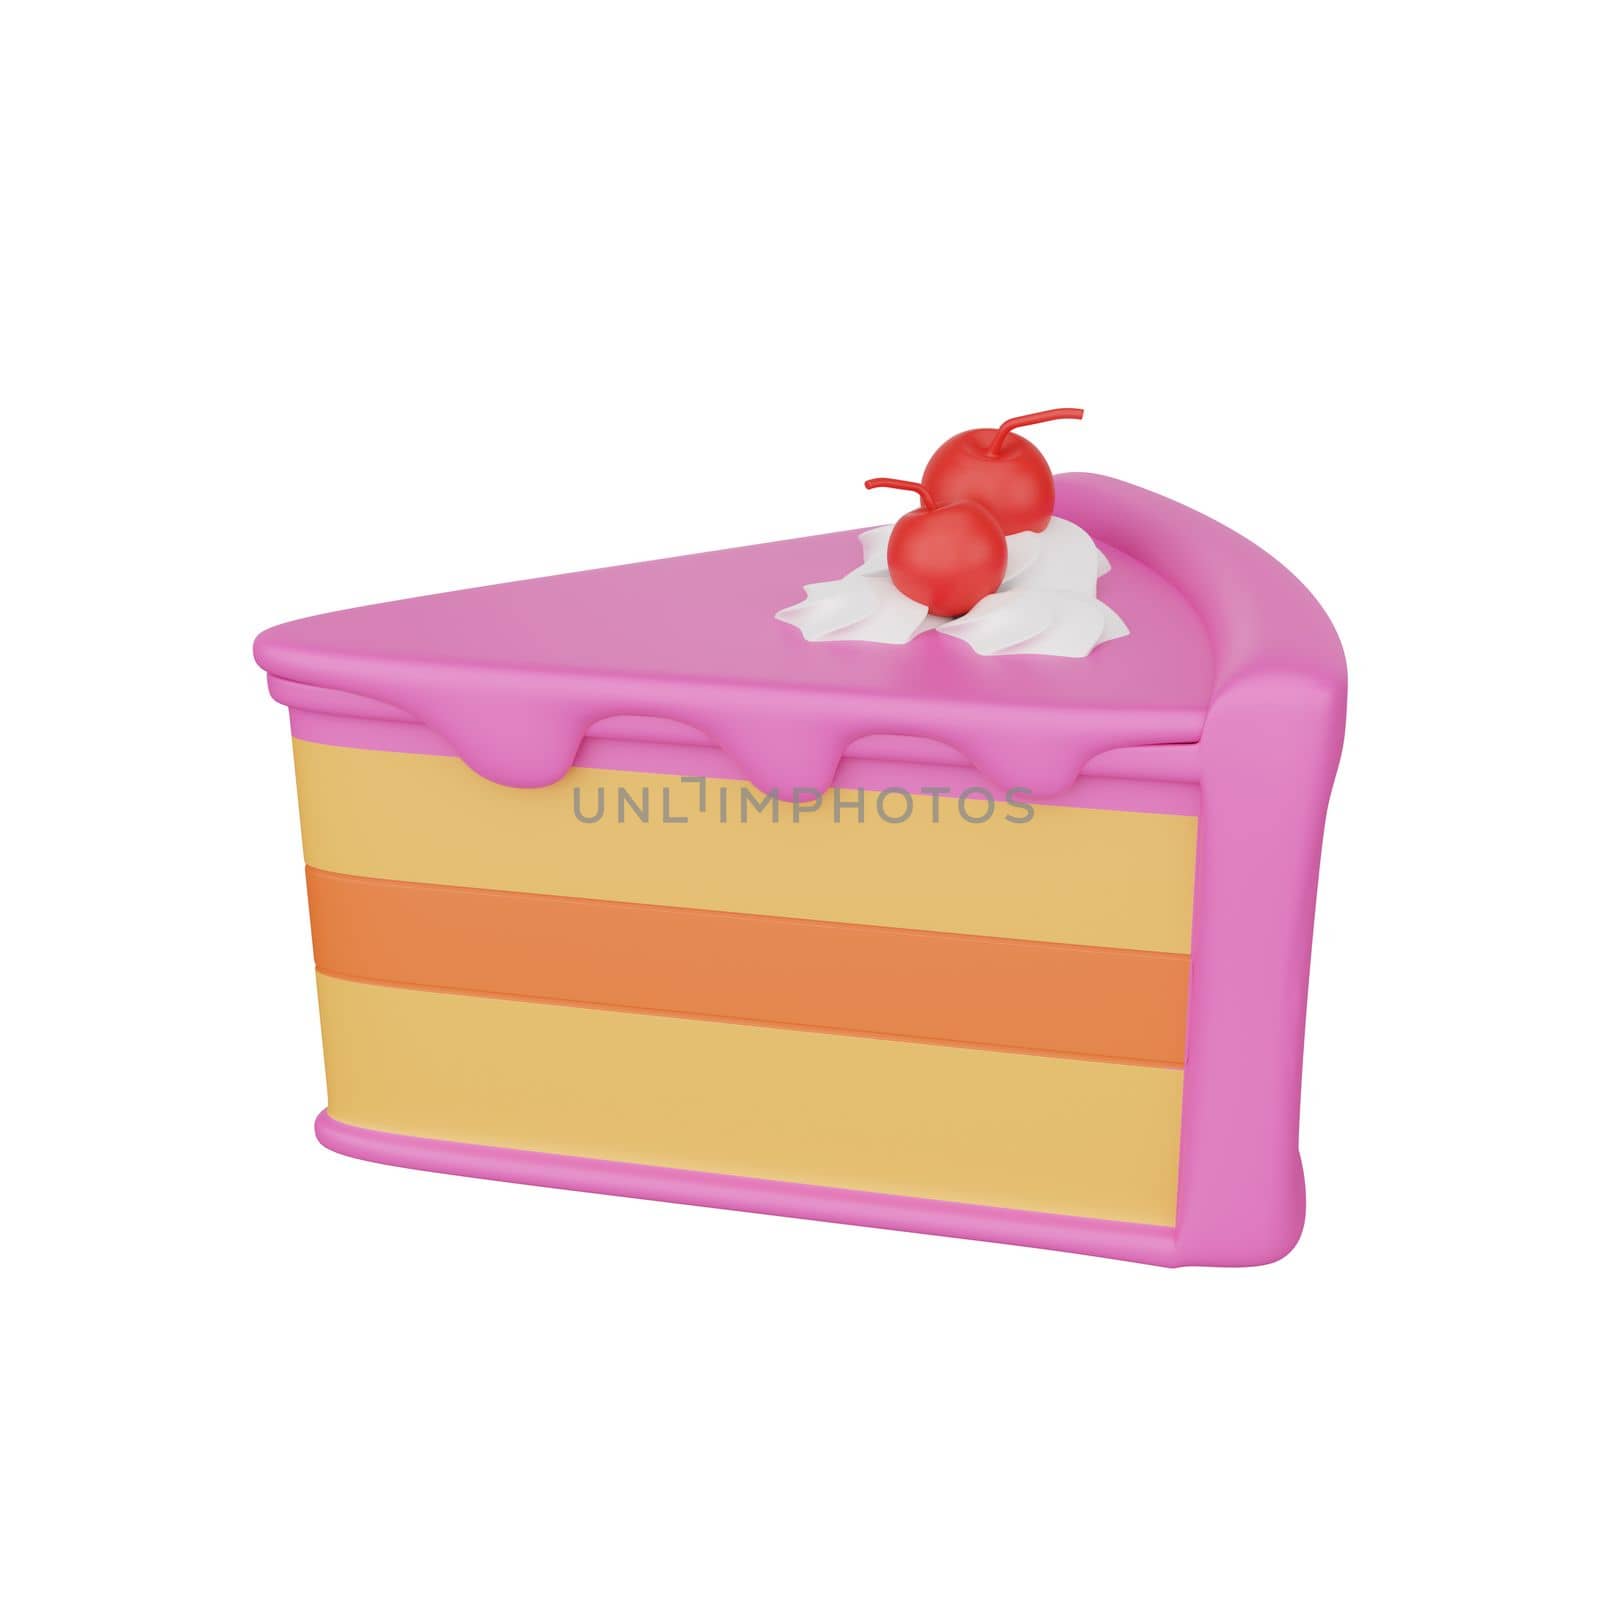 3d rendering of slice cake fast food icon